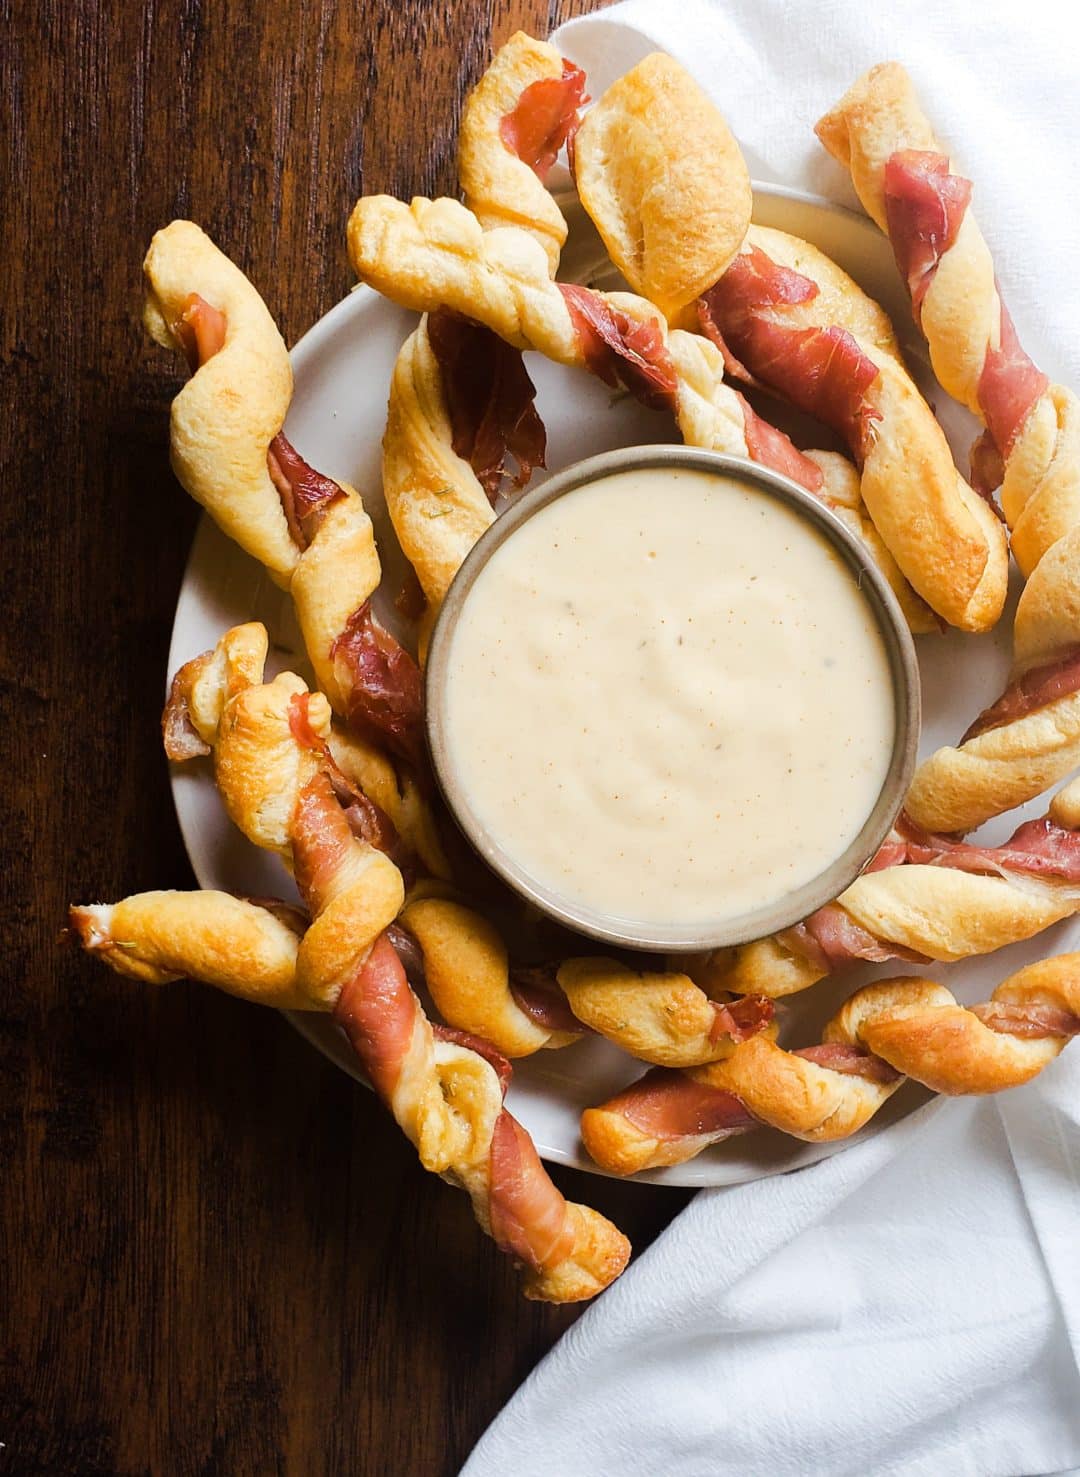 Image for Prosciutto Wrapped Breadsticks with Gouda Cheese Dip recipe. The image is an above shot. It shows a white plate with cheese dip in a gray bowl in the center of the plate. Surrounding the dip on the plate is the twists. The plate is sitting on a wooden table with a white cloth on the right side.